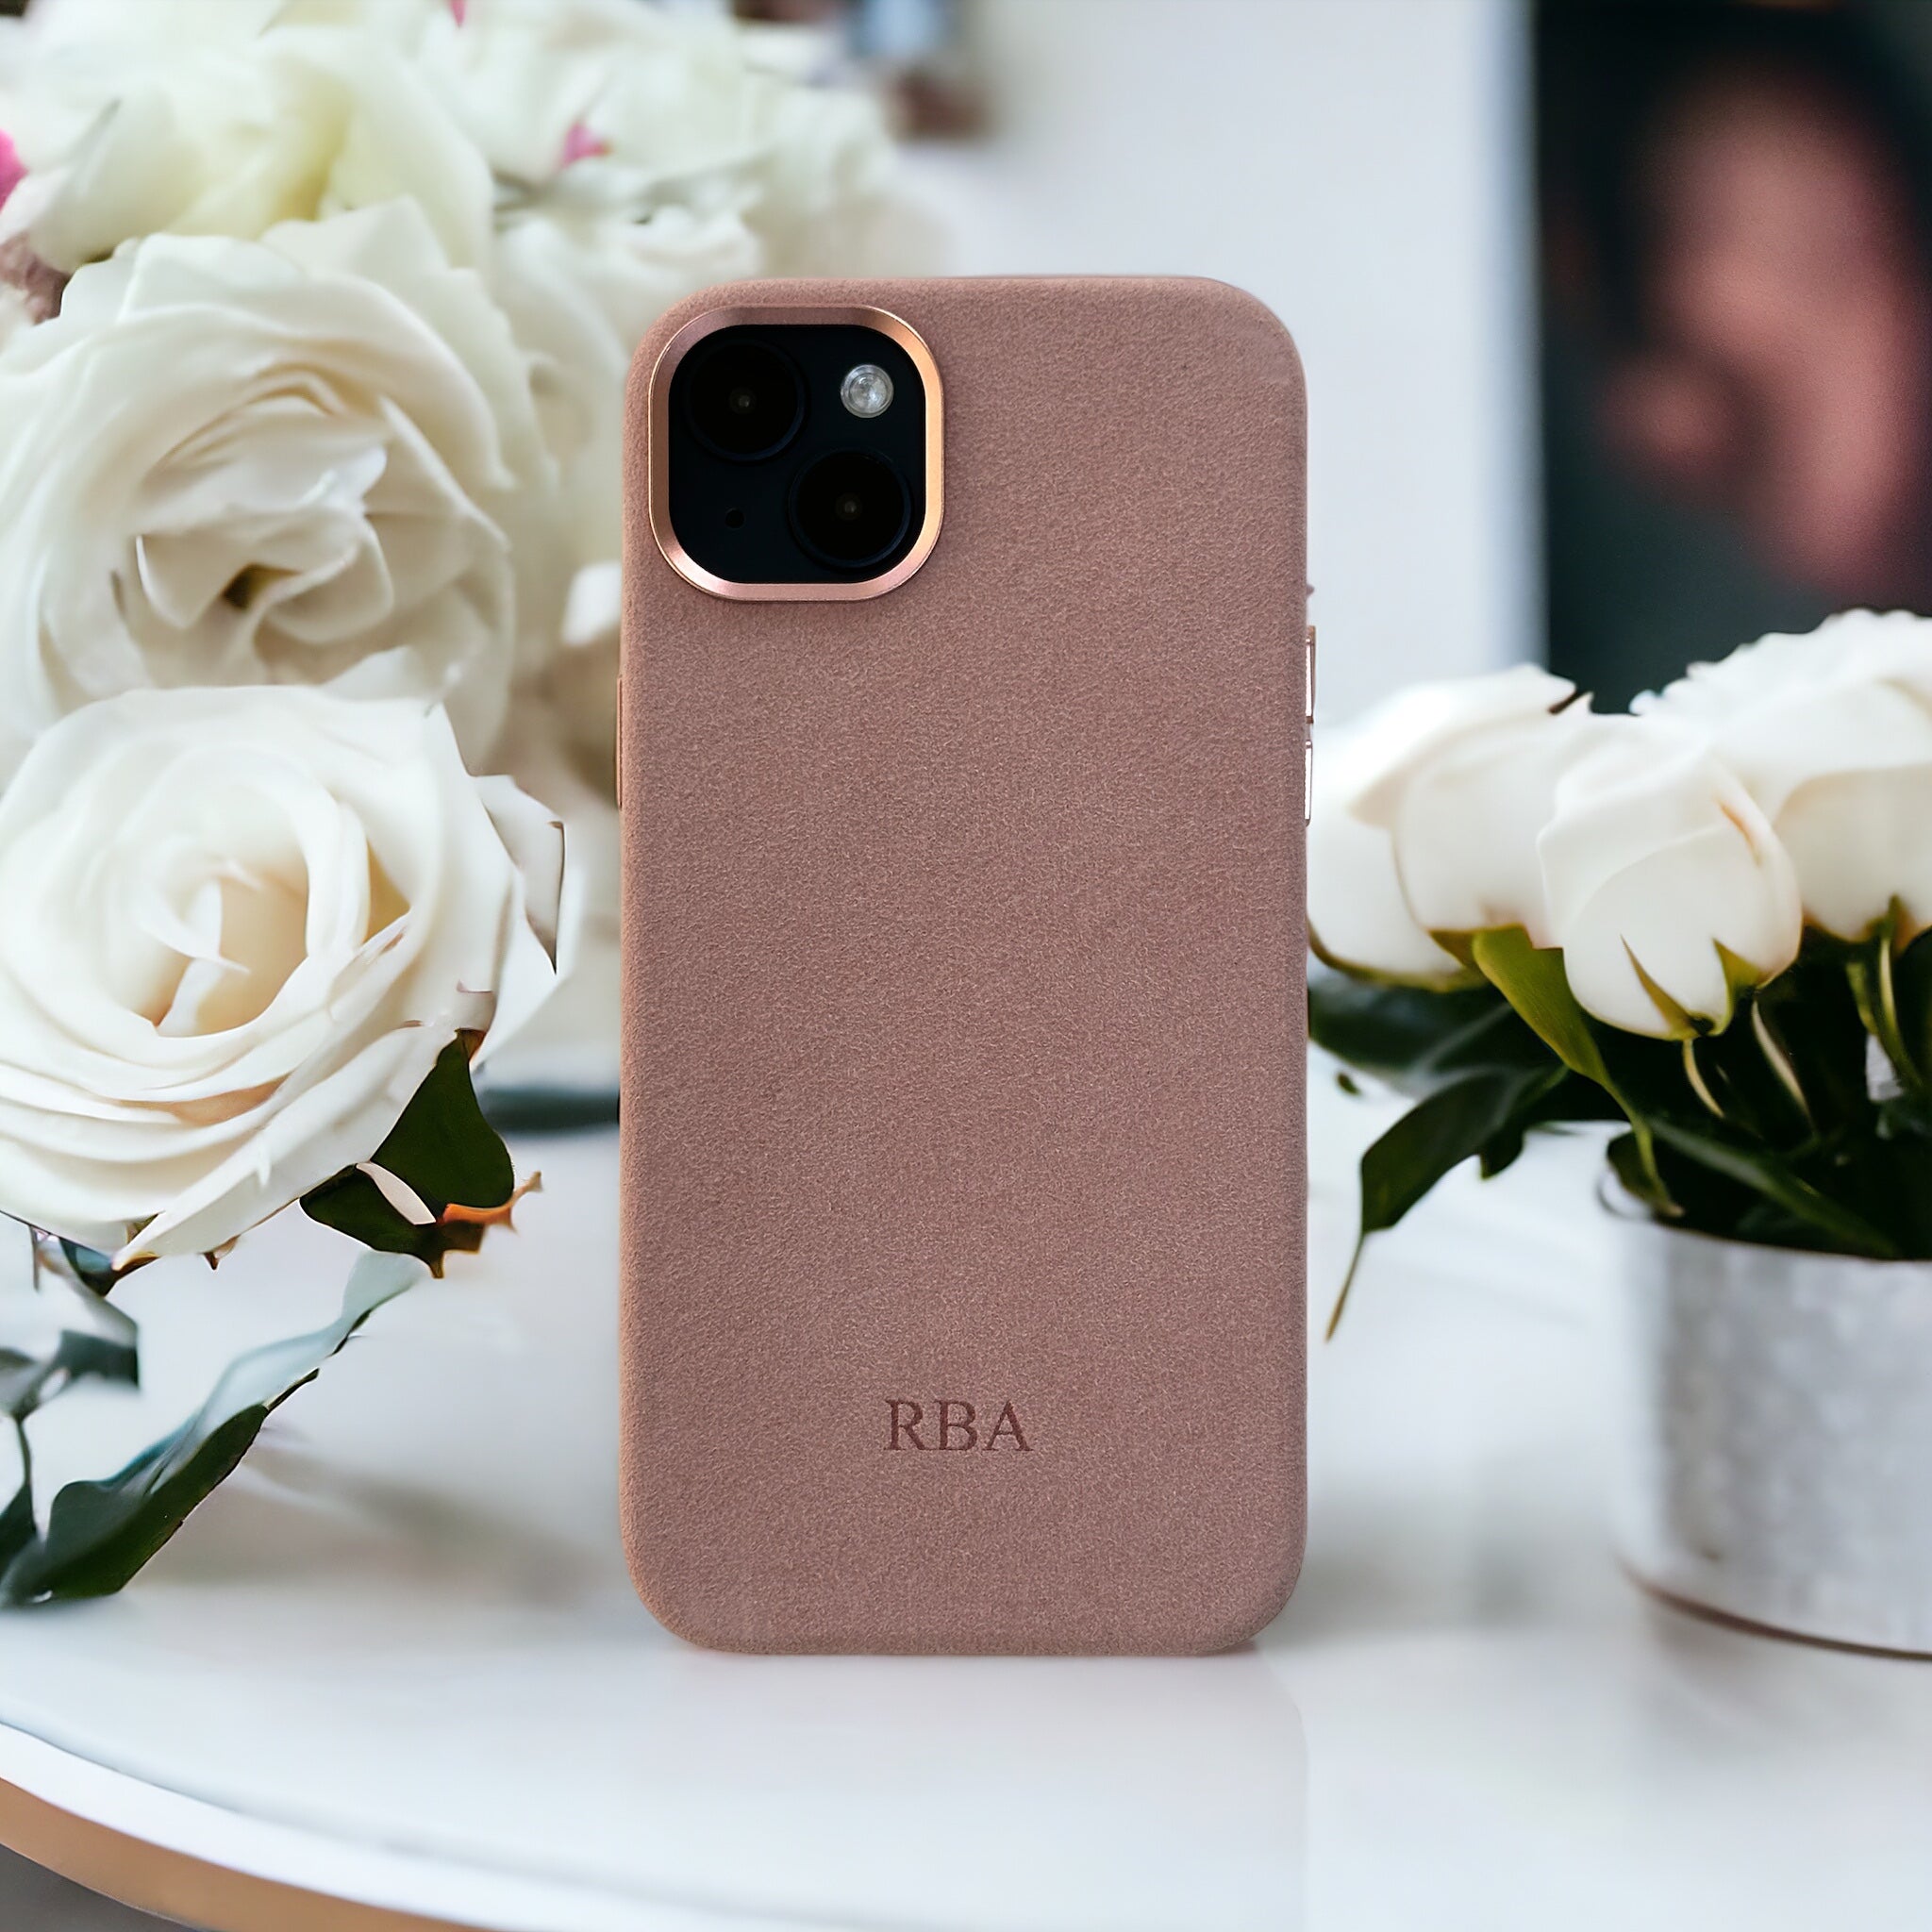 From Work to Play: A Personalized iPhone Case for Every Occasion